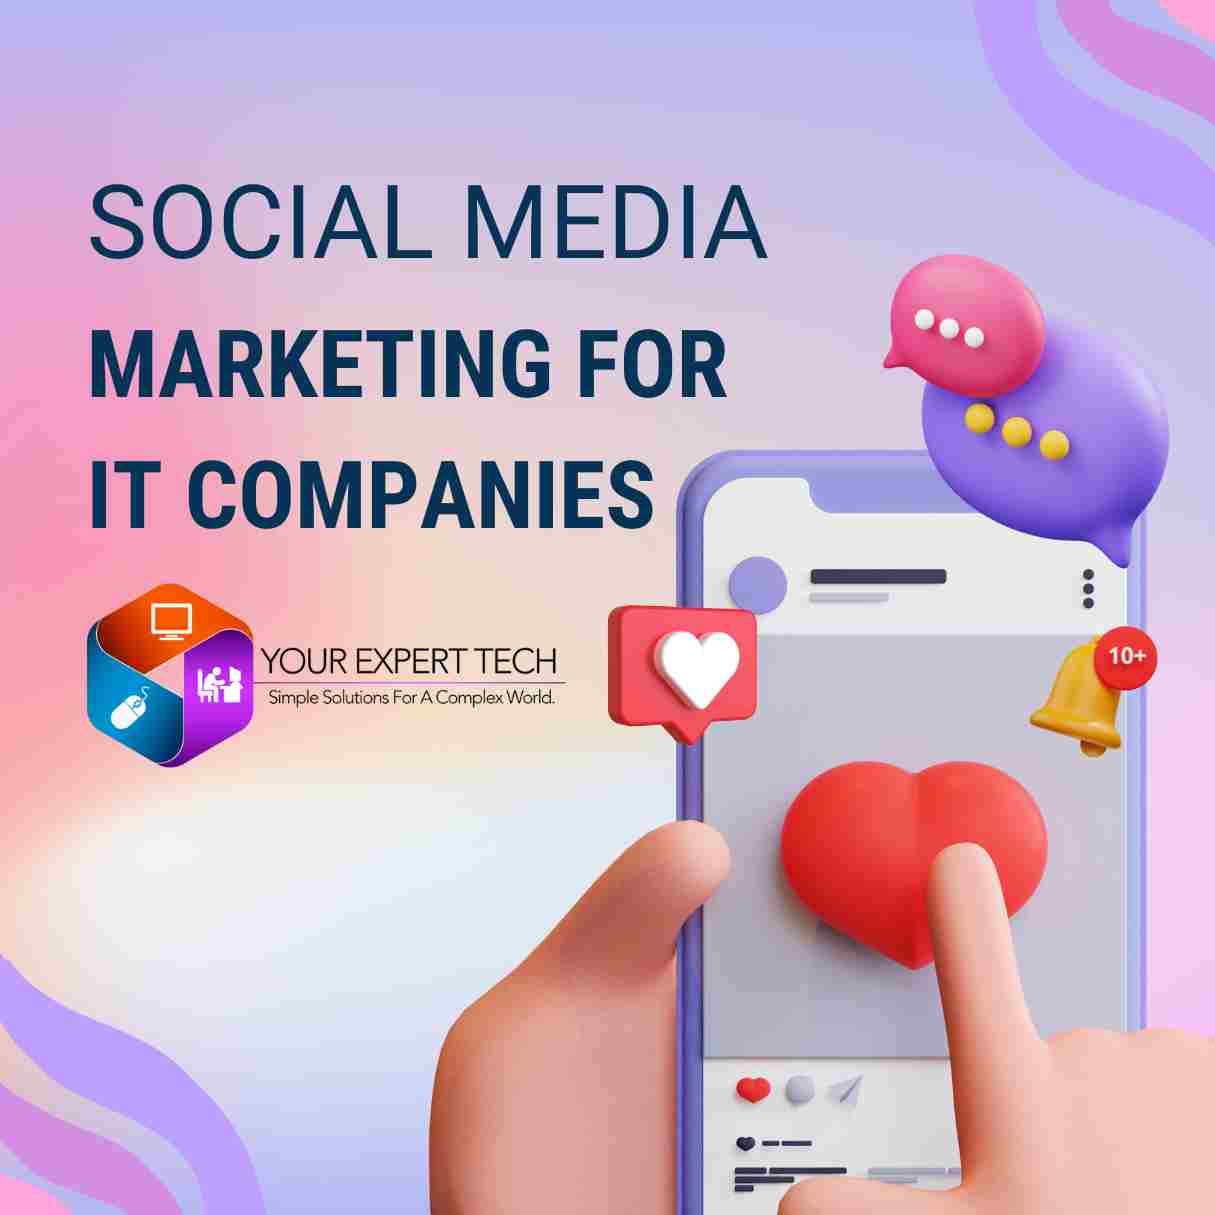 The image shows a smartphone screen with social media notifications and the text "Social Media Marketing for IT Companies," emphasizing online engagement.